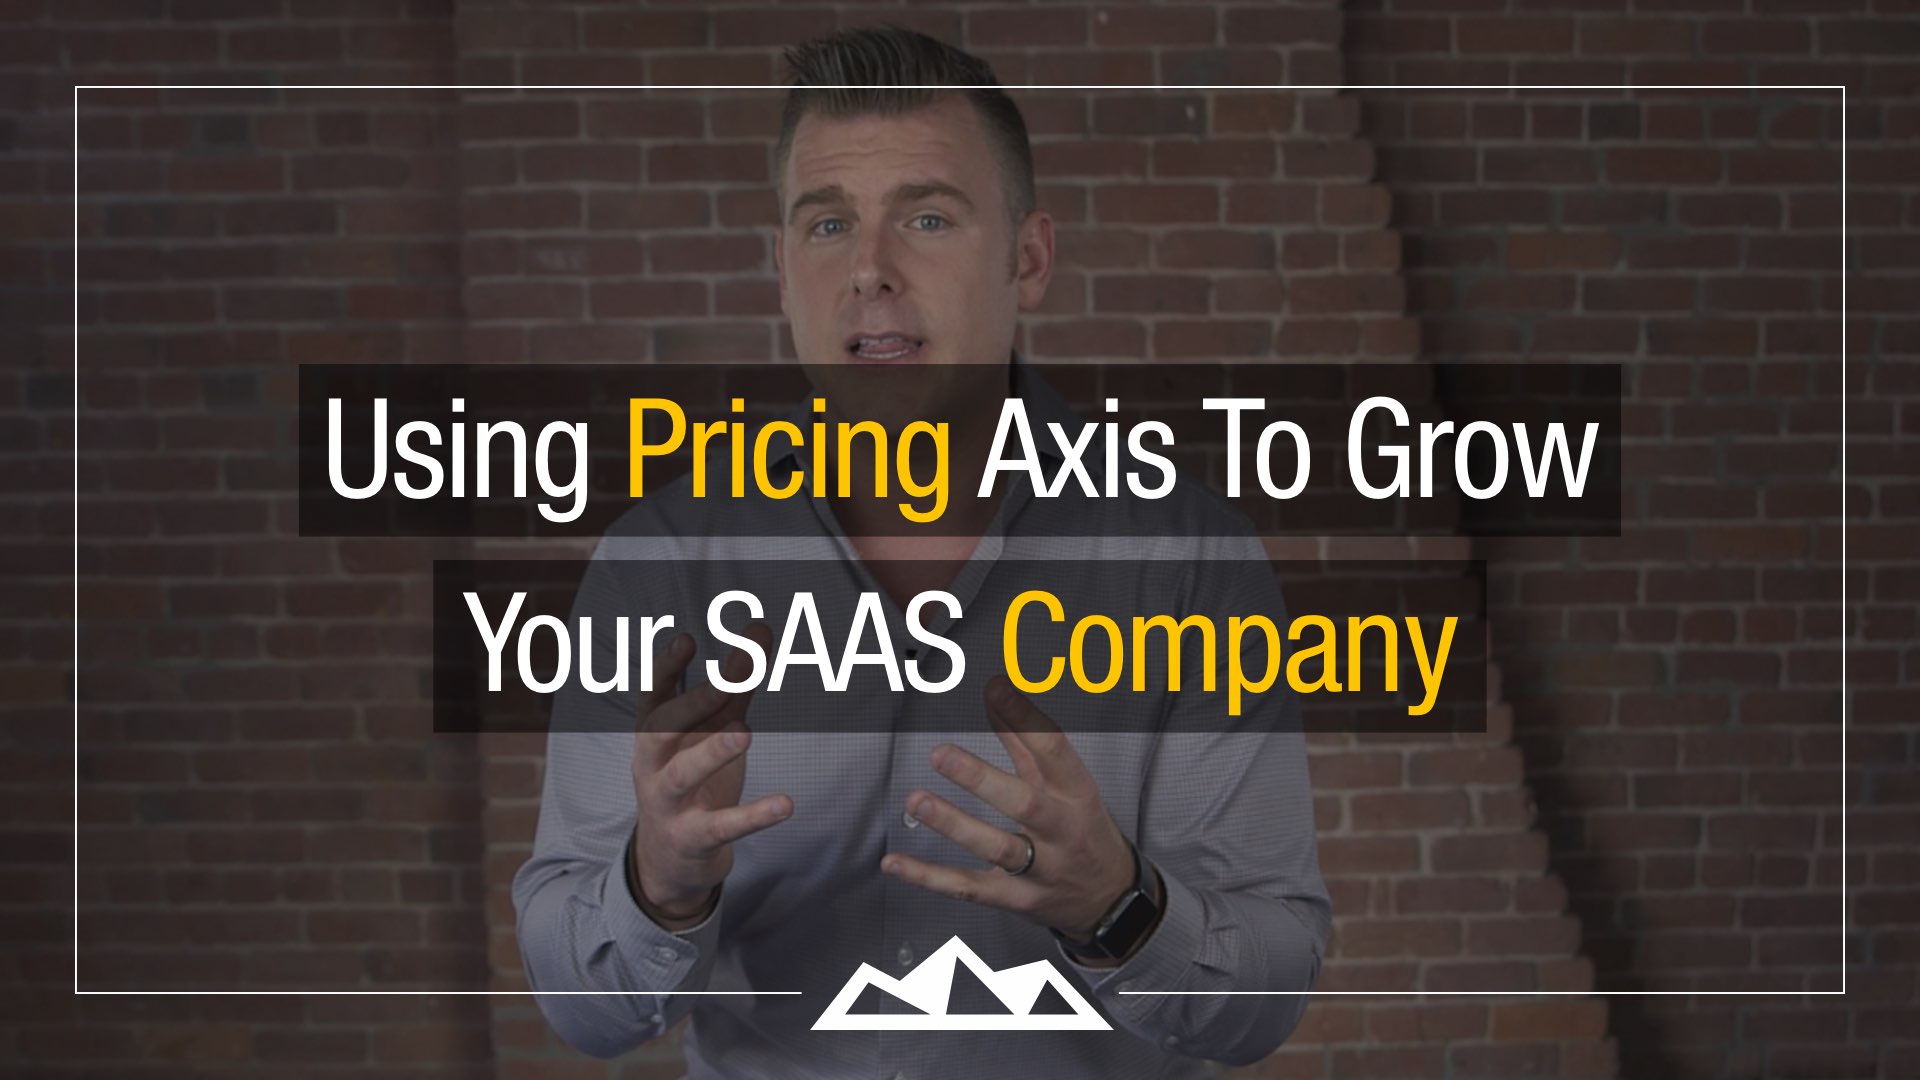 Using Pricing Axis To Grow Your SaaS Company’s Revenue